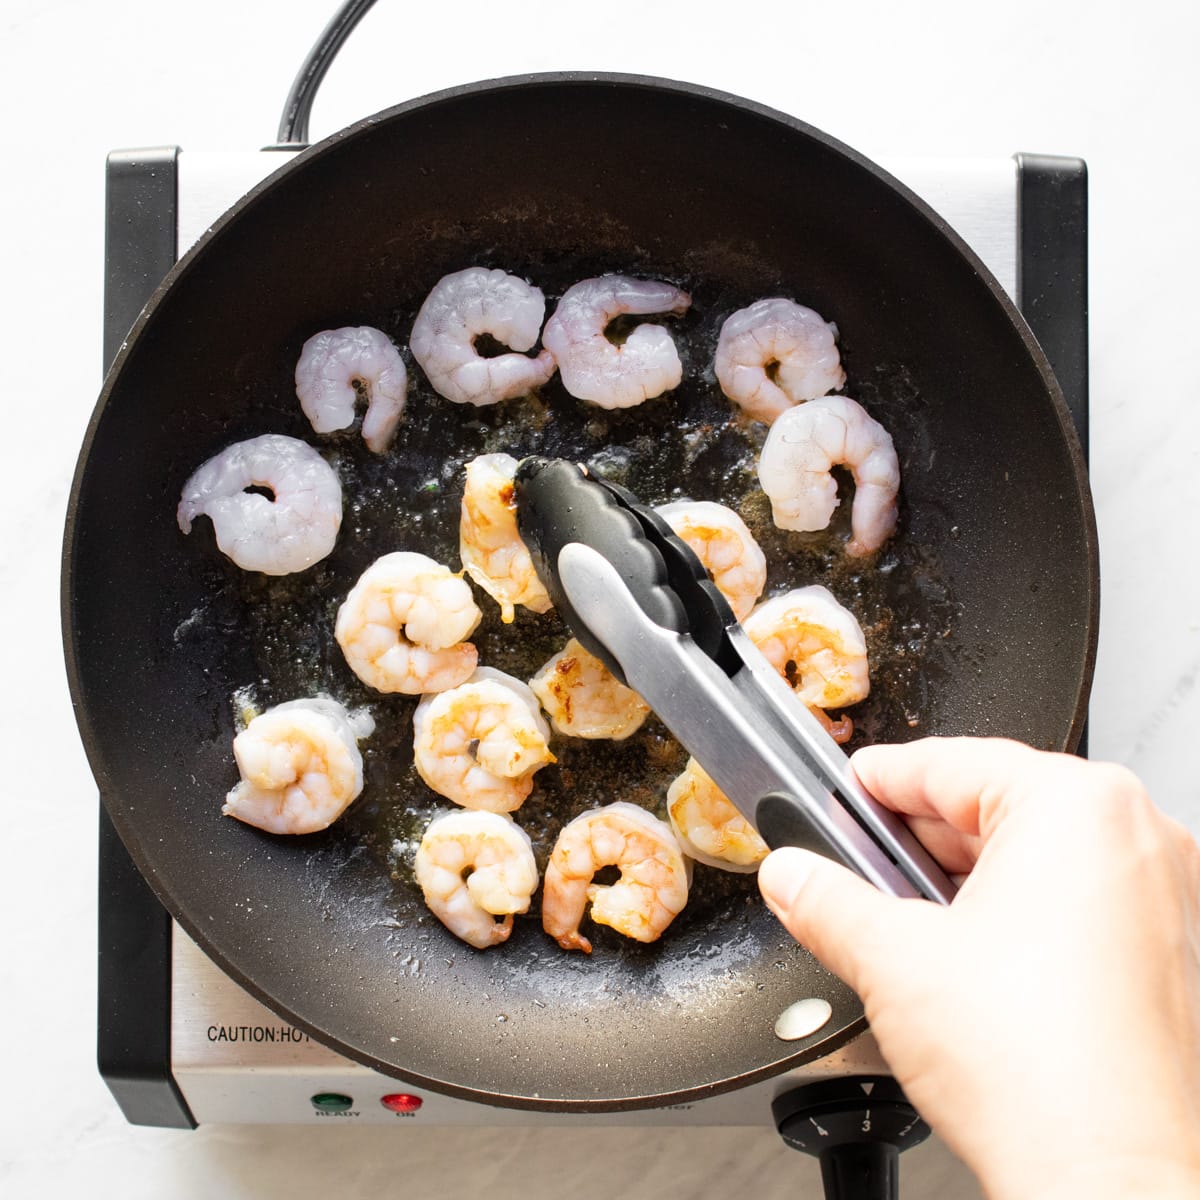 Flipping shrimp with a tongs to cook evenly on both sides.